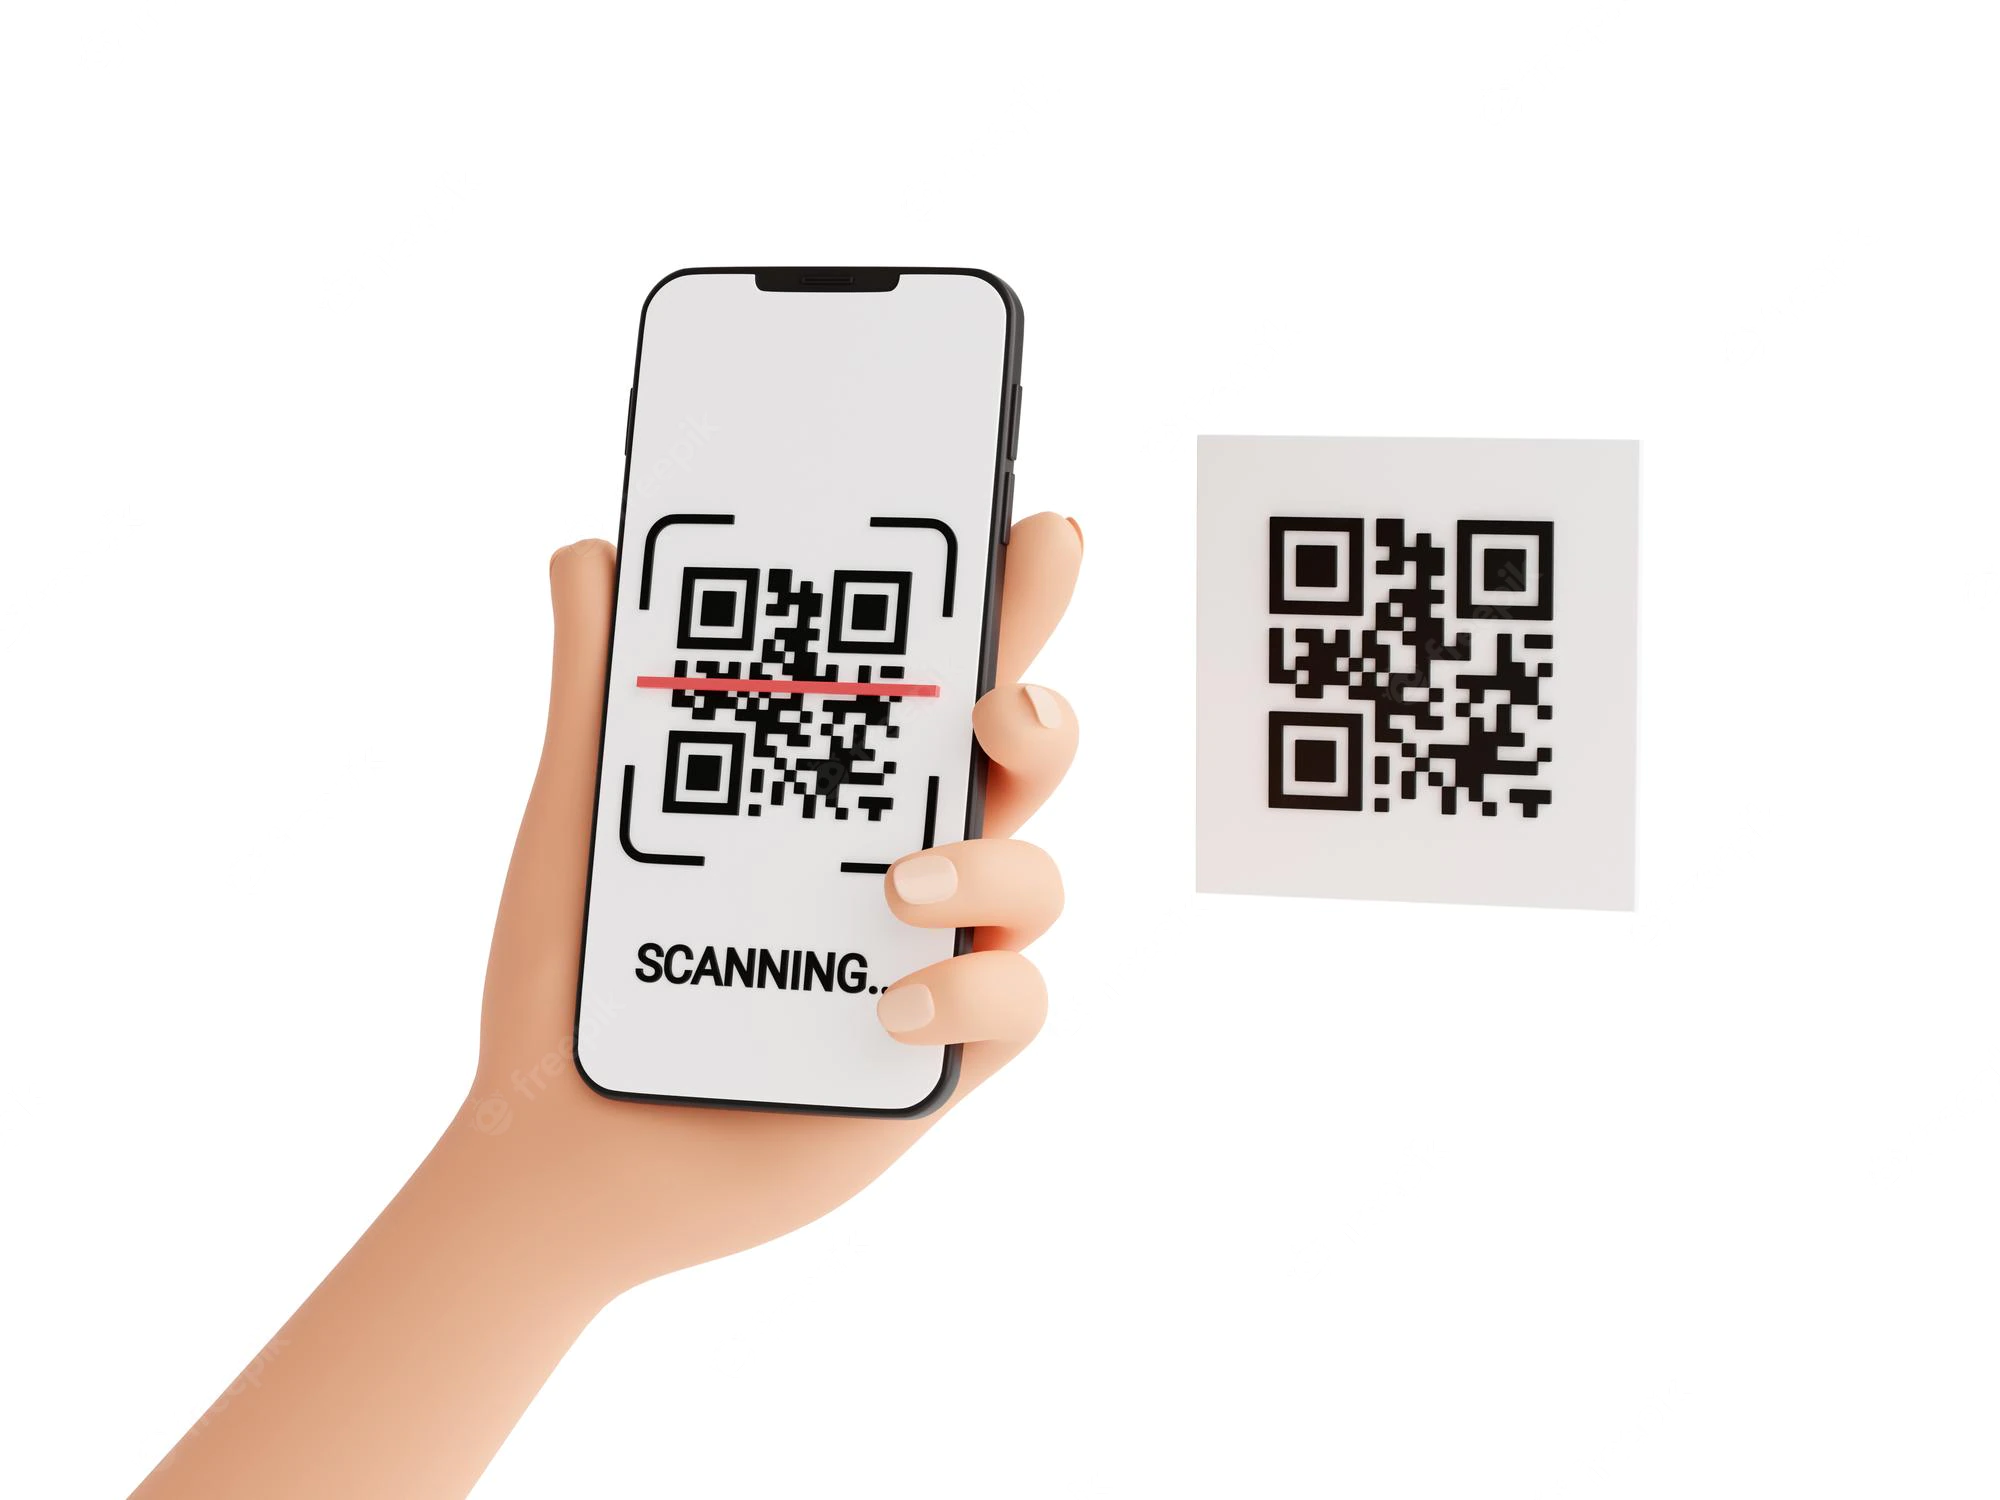 qr-code-scan-concept-human-hand-holding-mobile-phone-with-barcode-scanning-process-3d-render-illustration_75114-893